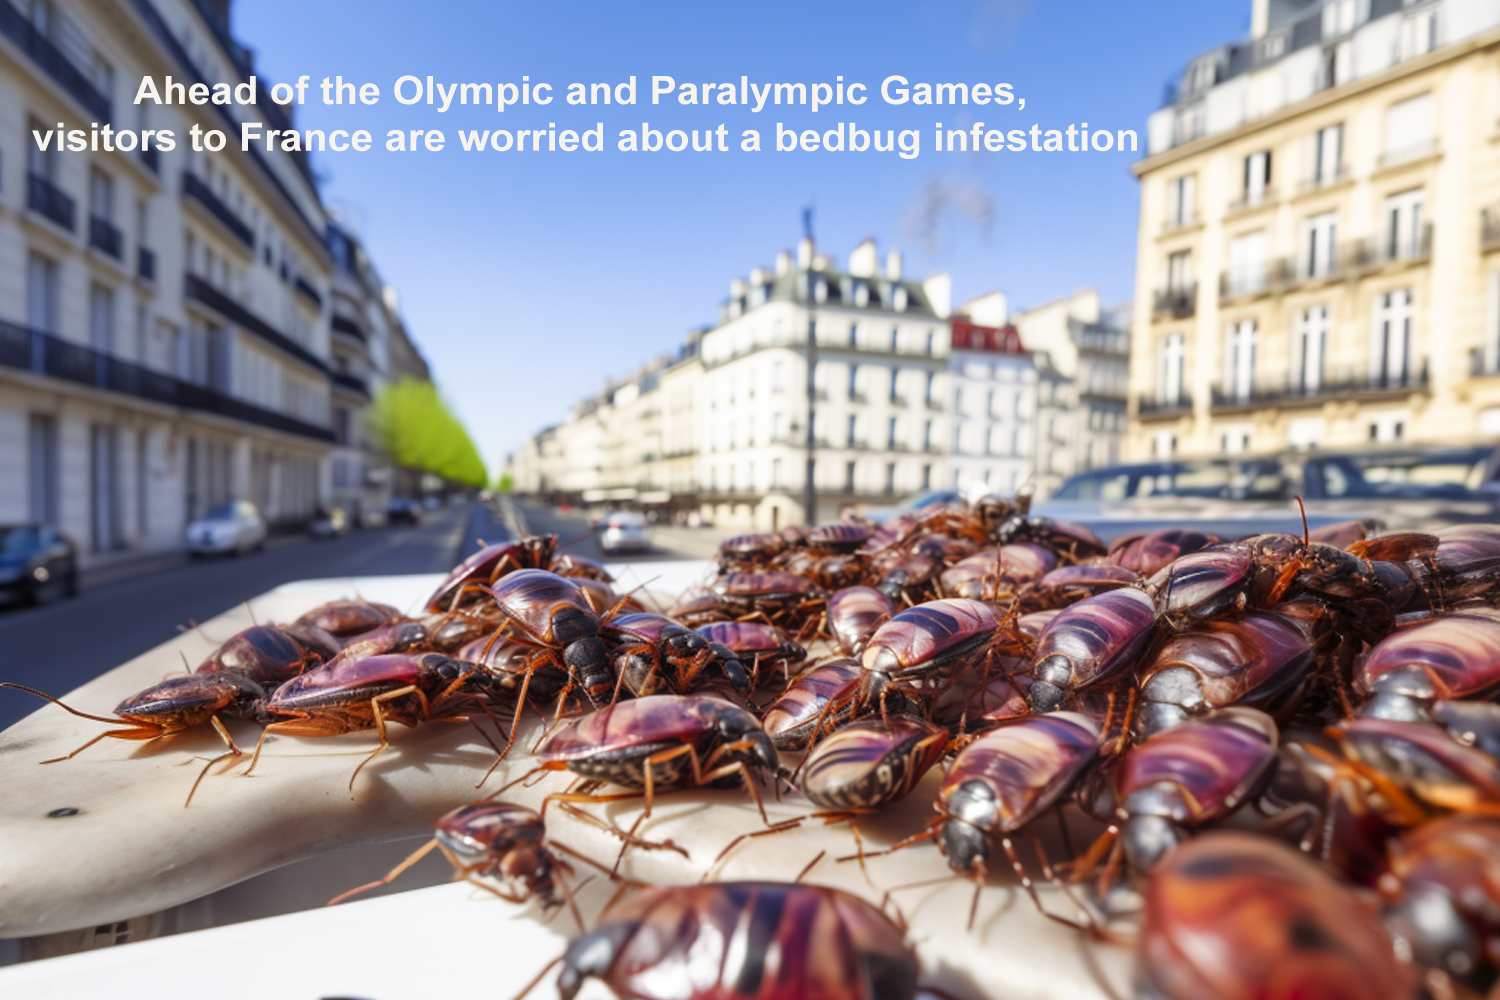 Ahead of the Olympic and Paralympic Games, visitors to France are worried about a bedbug infestation.